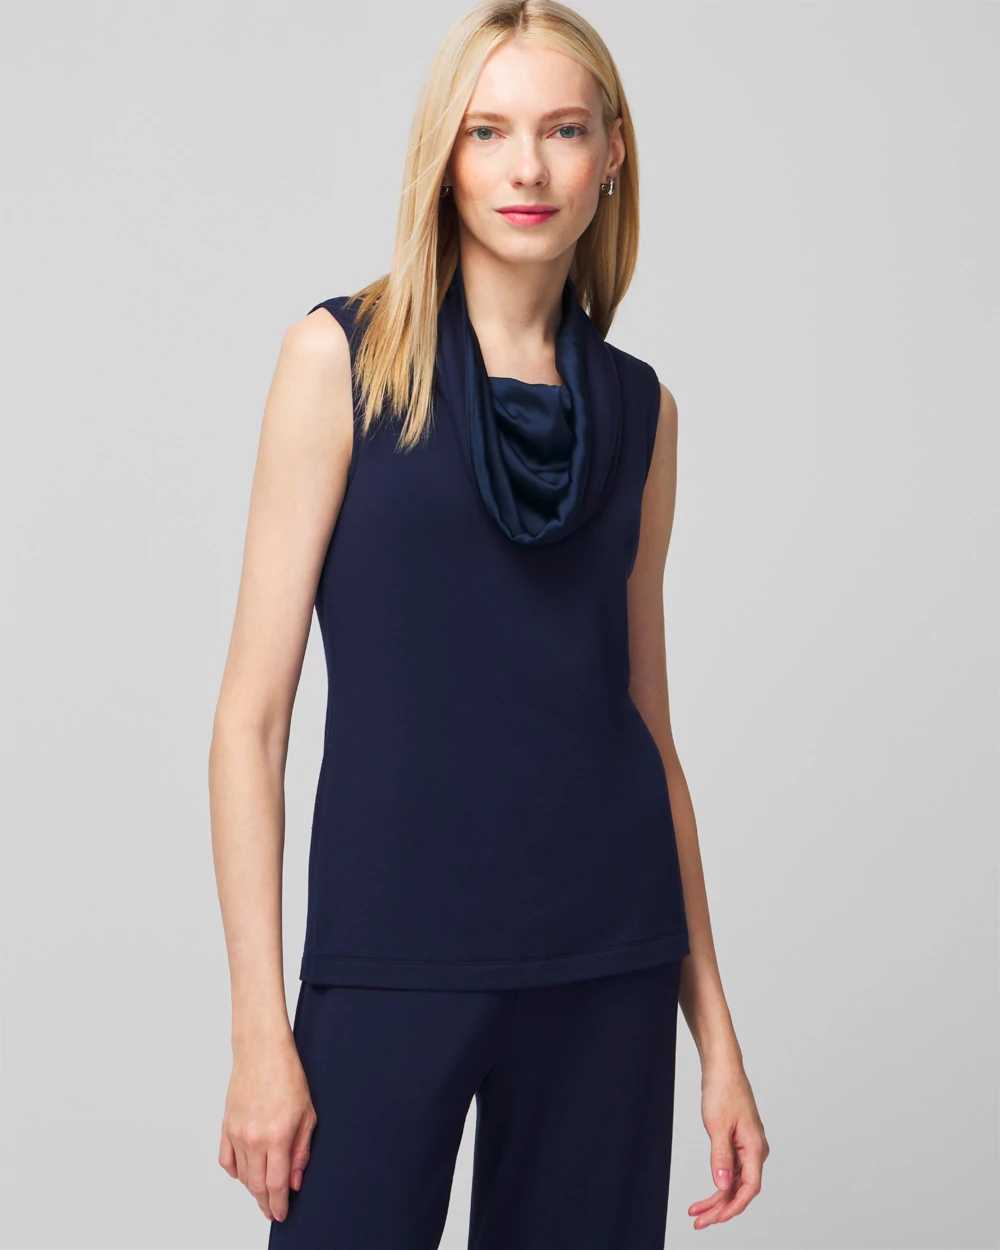 The Passporter   Sleeveless Top click to view larger image.